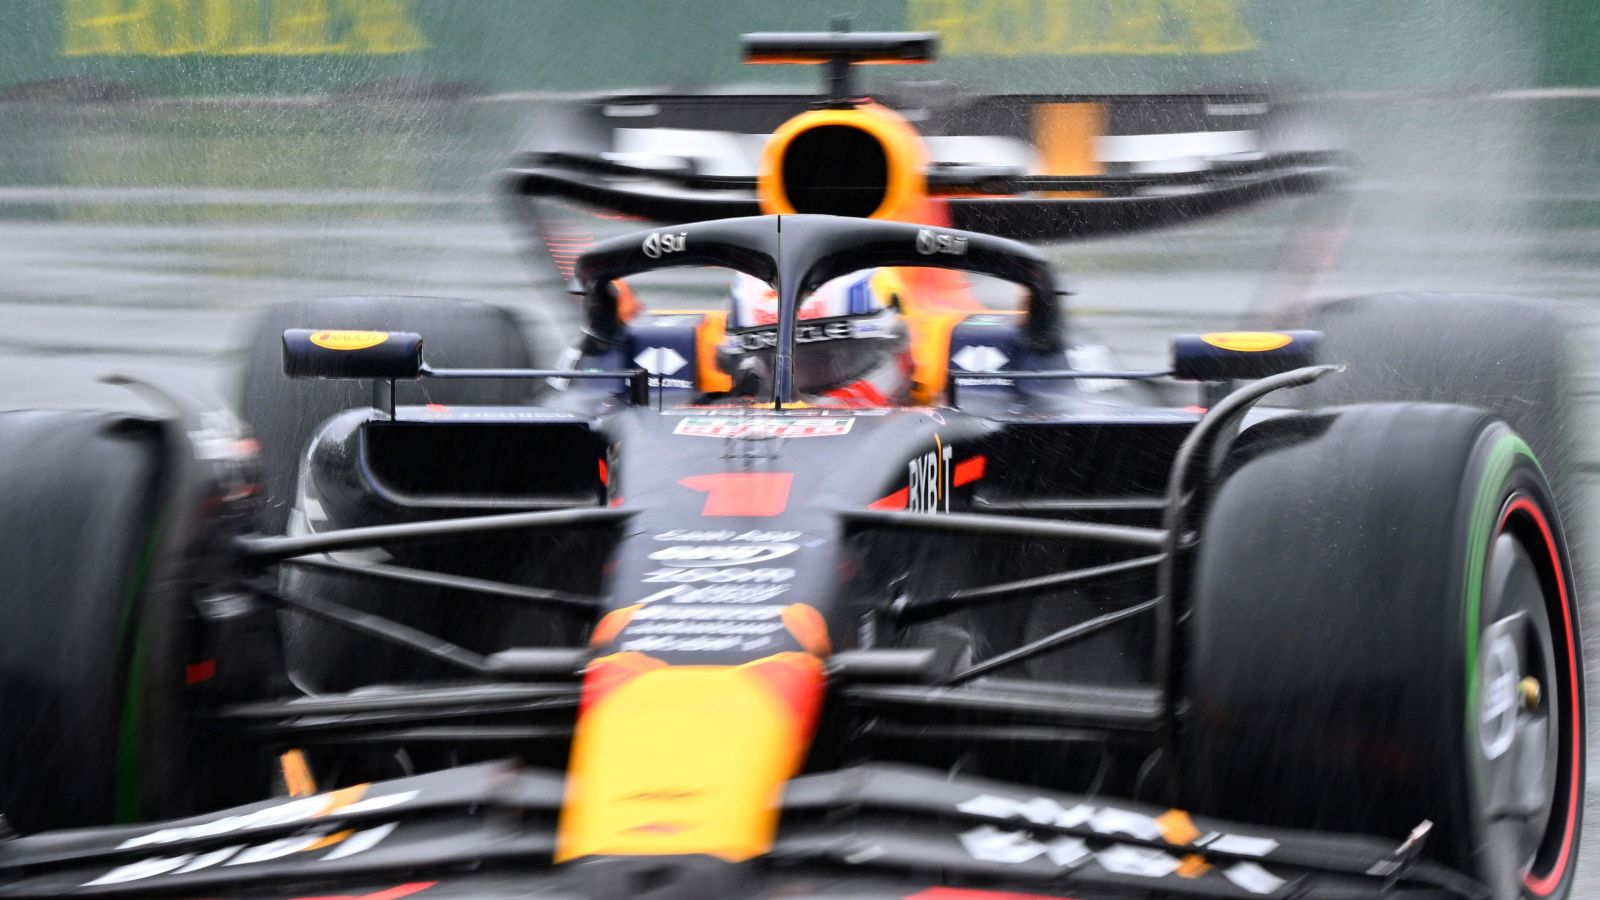 Red Bull driver Max Verstappen in action during the rain-affected Canadian Grand Prix qualifying session. Montreal, June 2023.